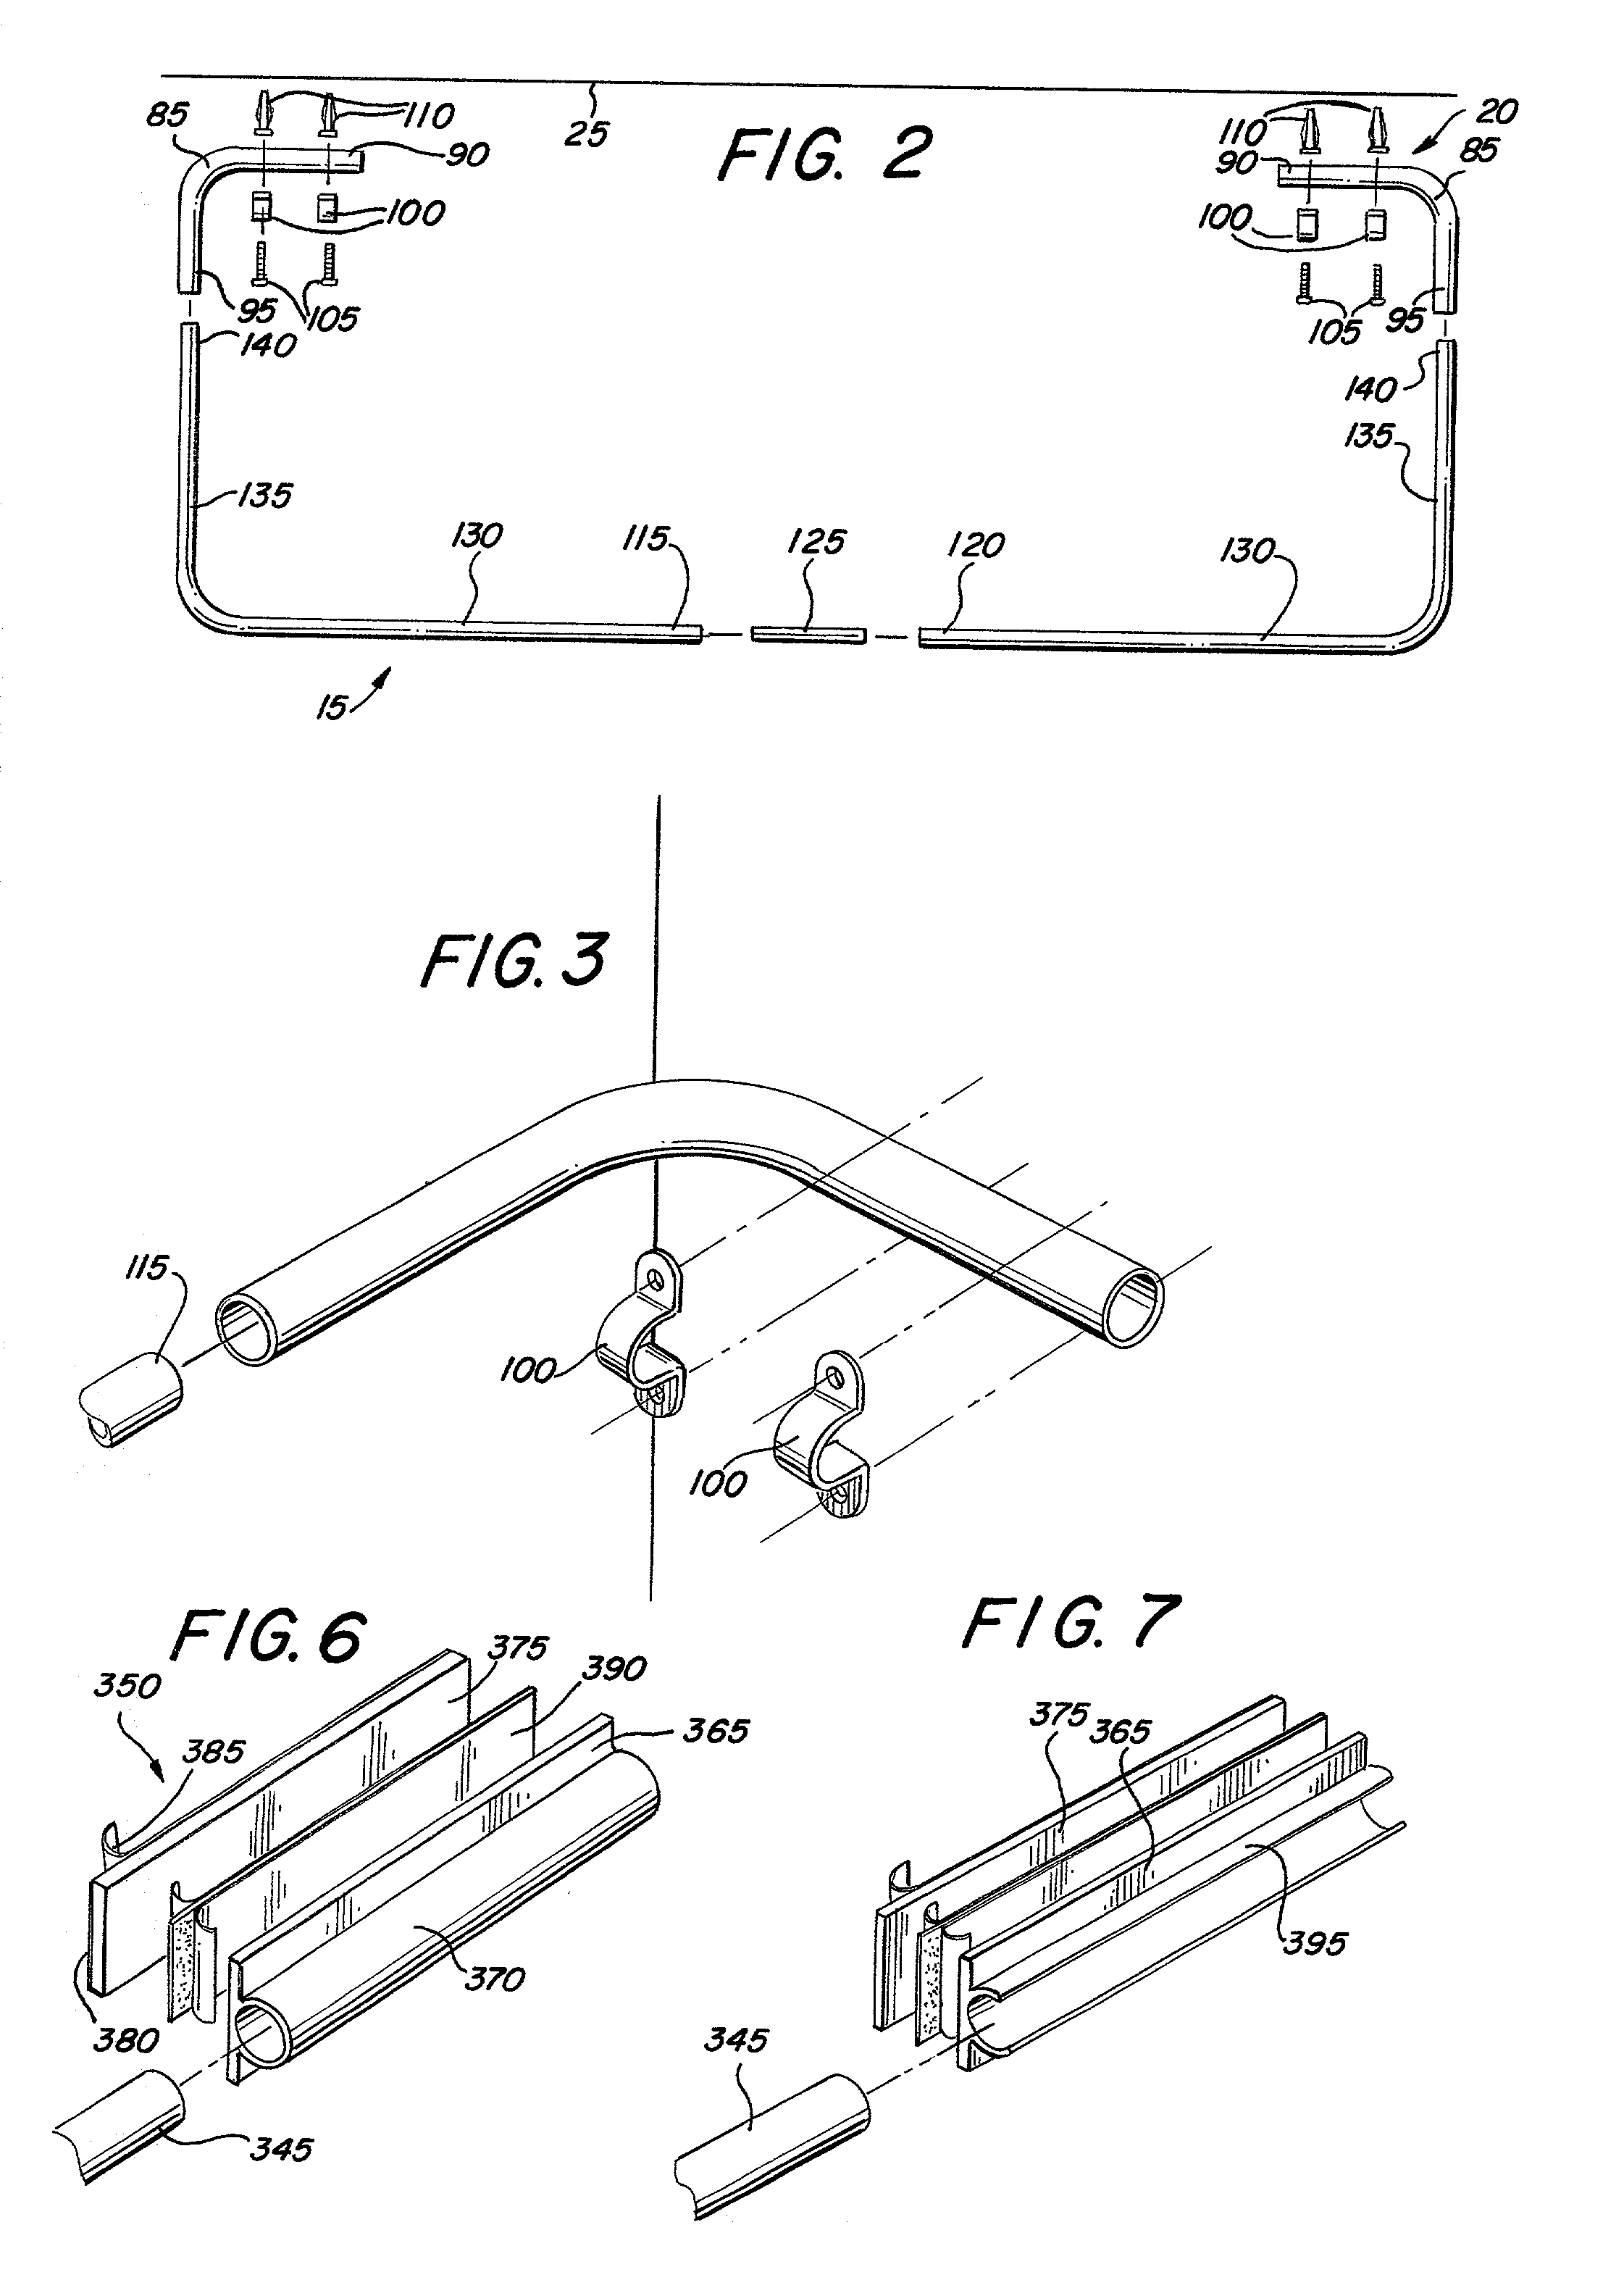 Apparatus and method for preventing water from escaping a shower area